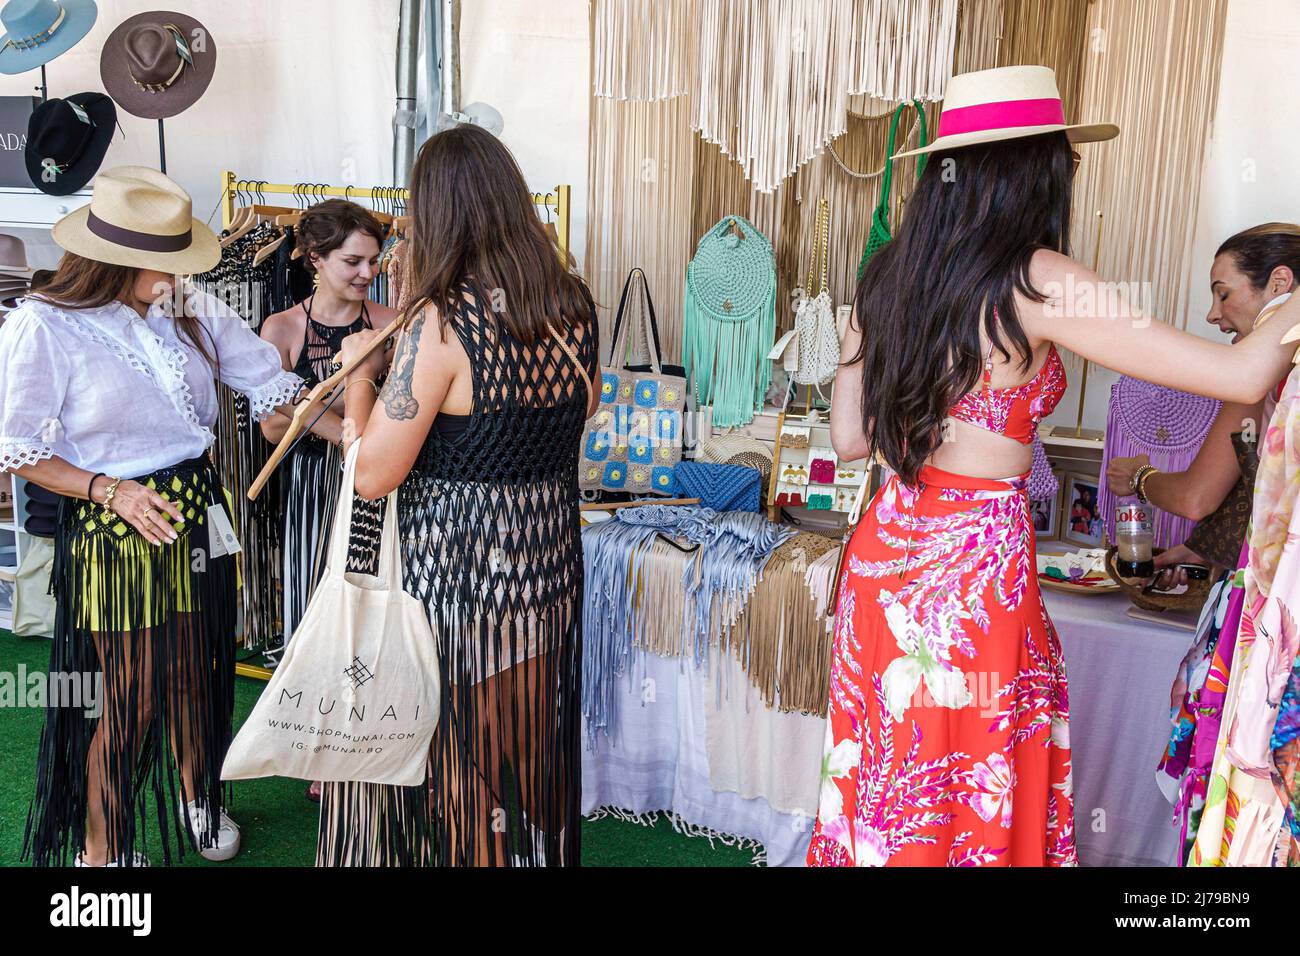 Miami Beach Florida Beach Polo World Cup Miami annual event Retail Village shopping vendors tents clothing display sale fashionable woman wearing hats Stock Photo